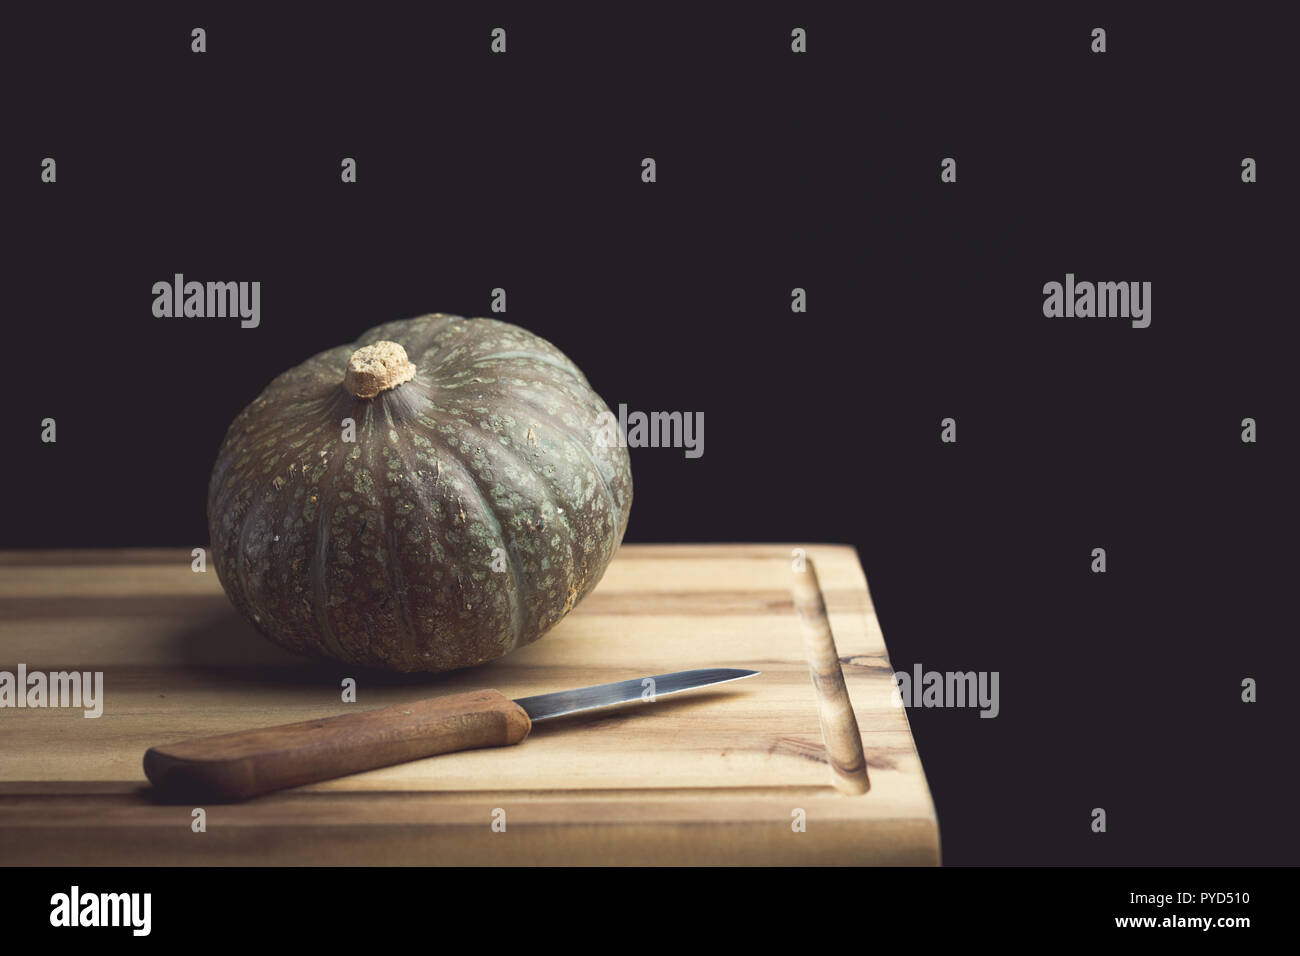 Pumpkin and knife on a wooden cutting board Stock Photo